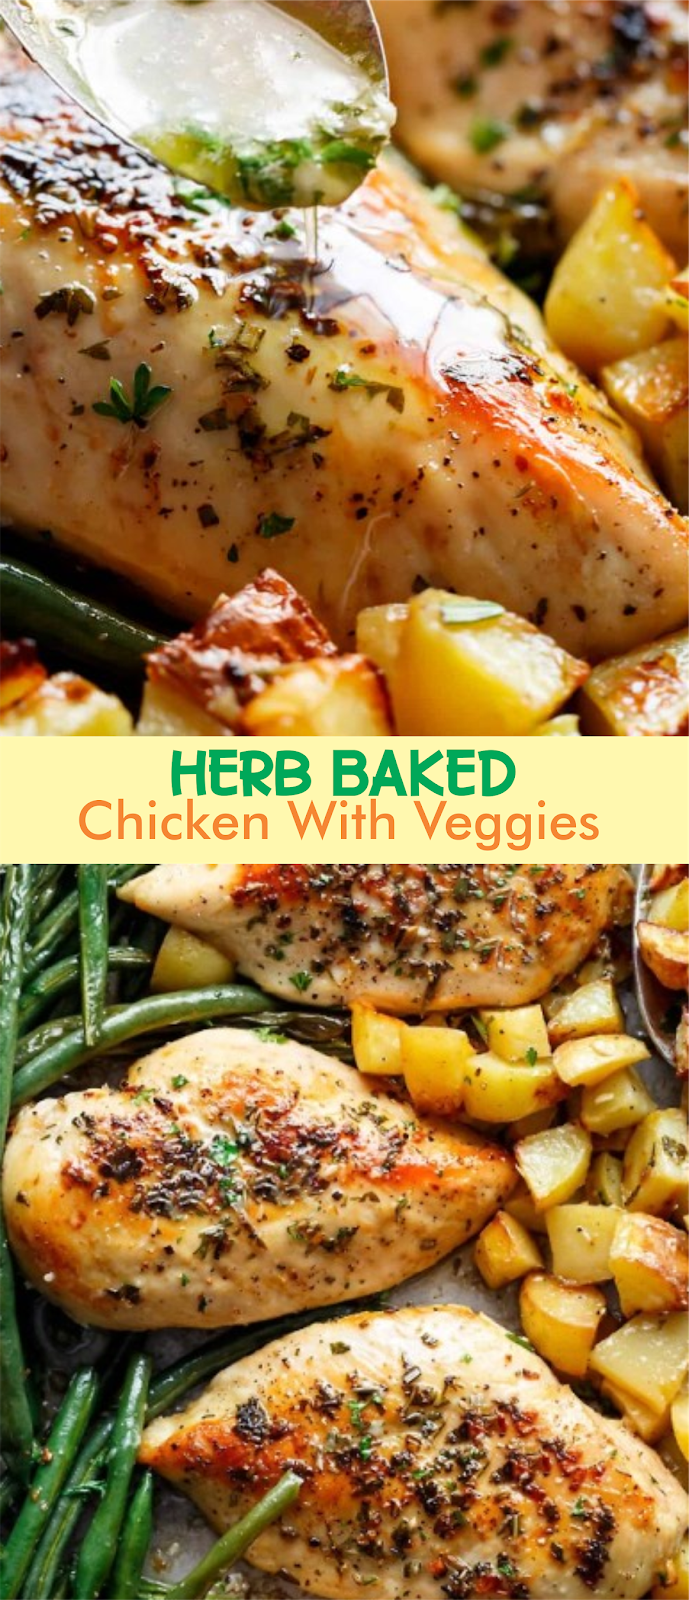 Herb Baked Chicken With Veggies | EAT